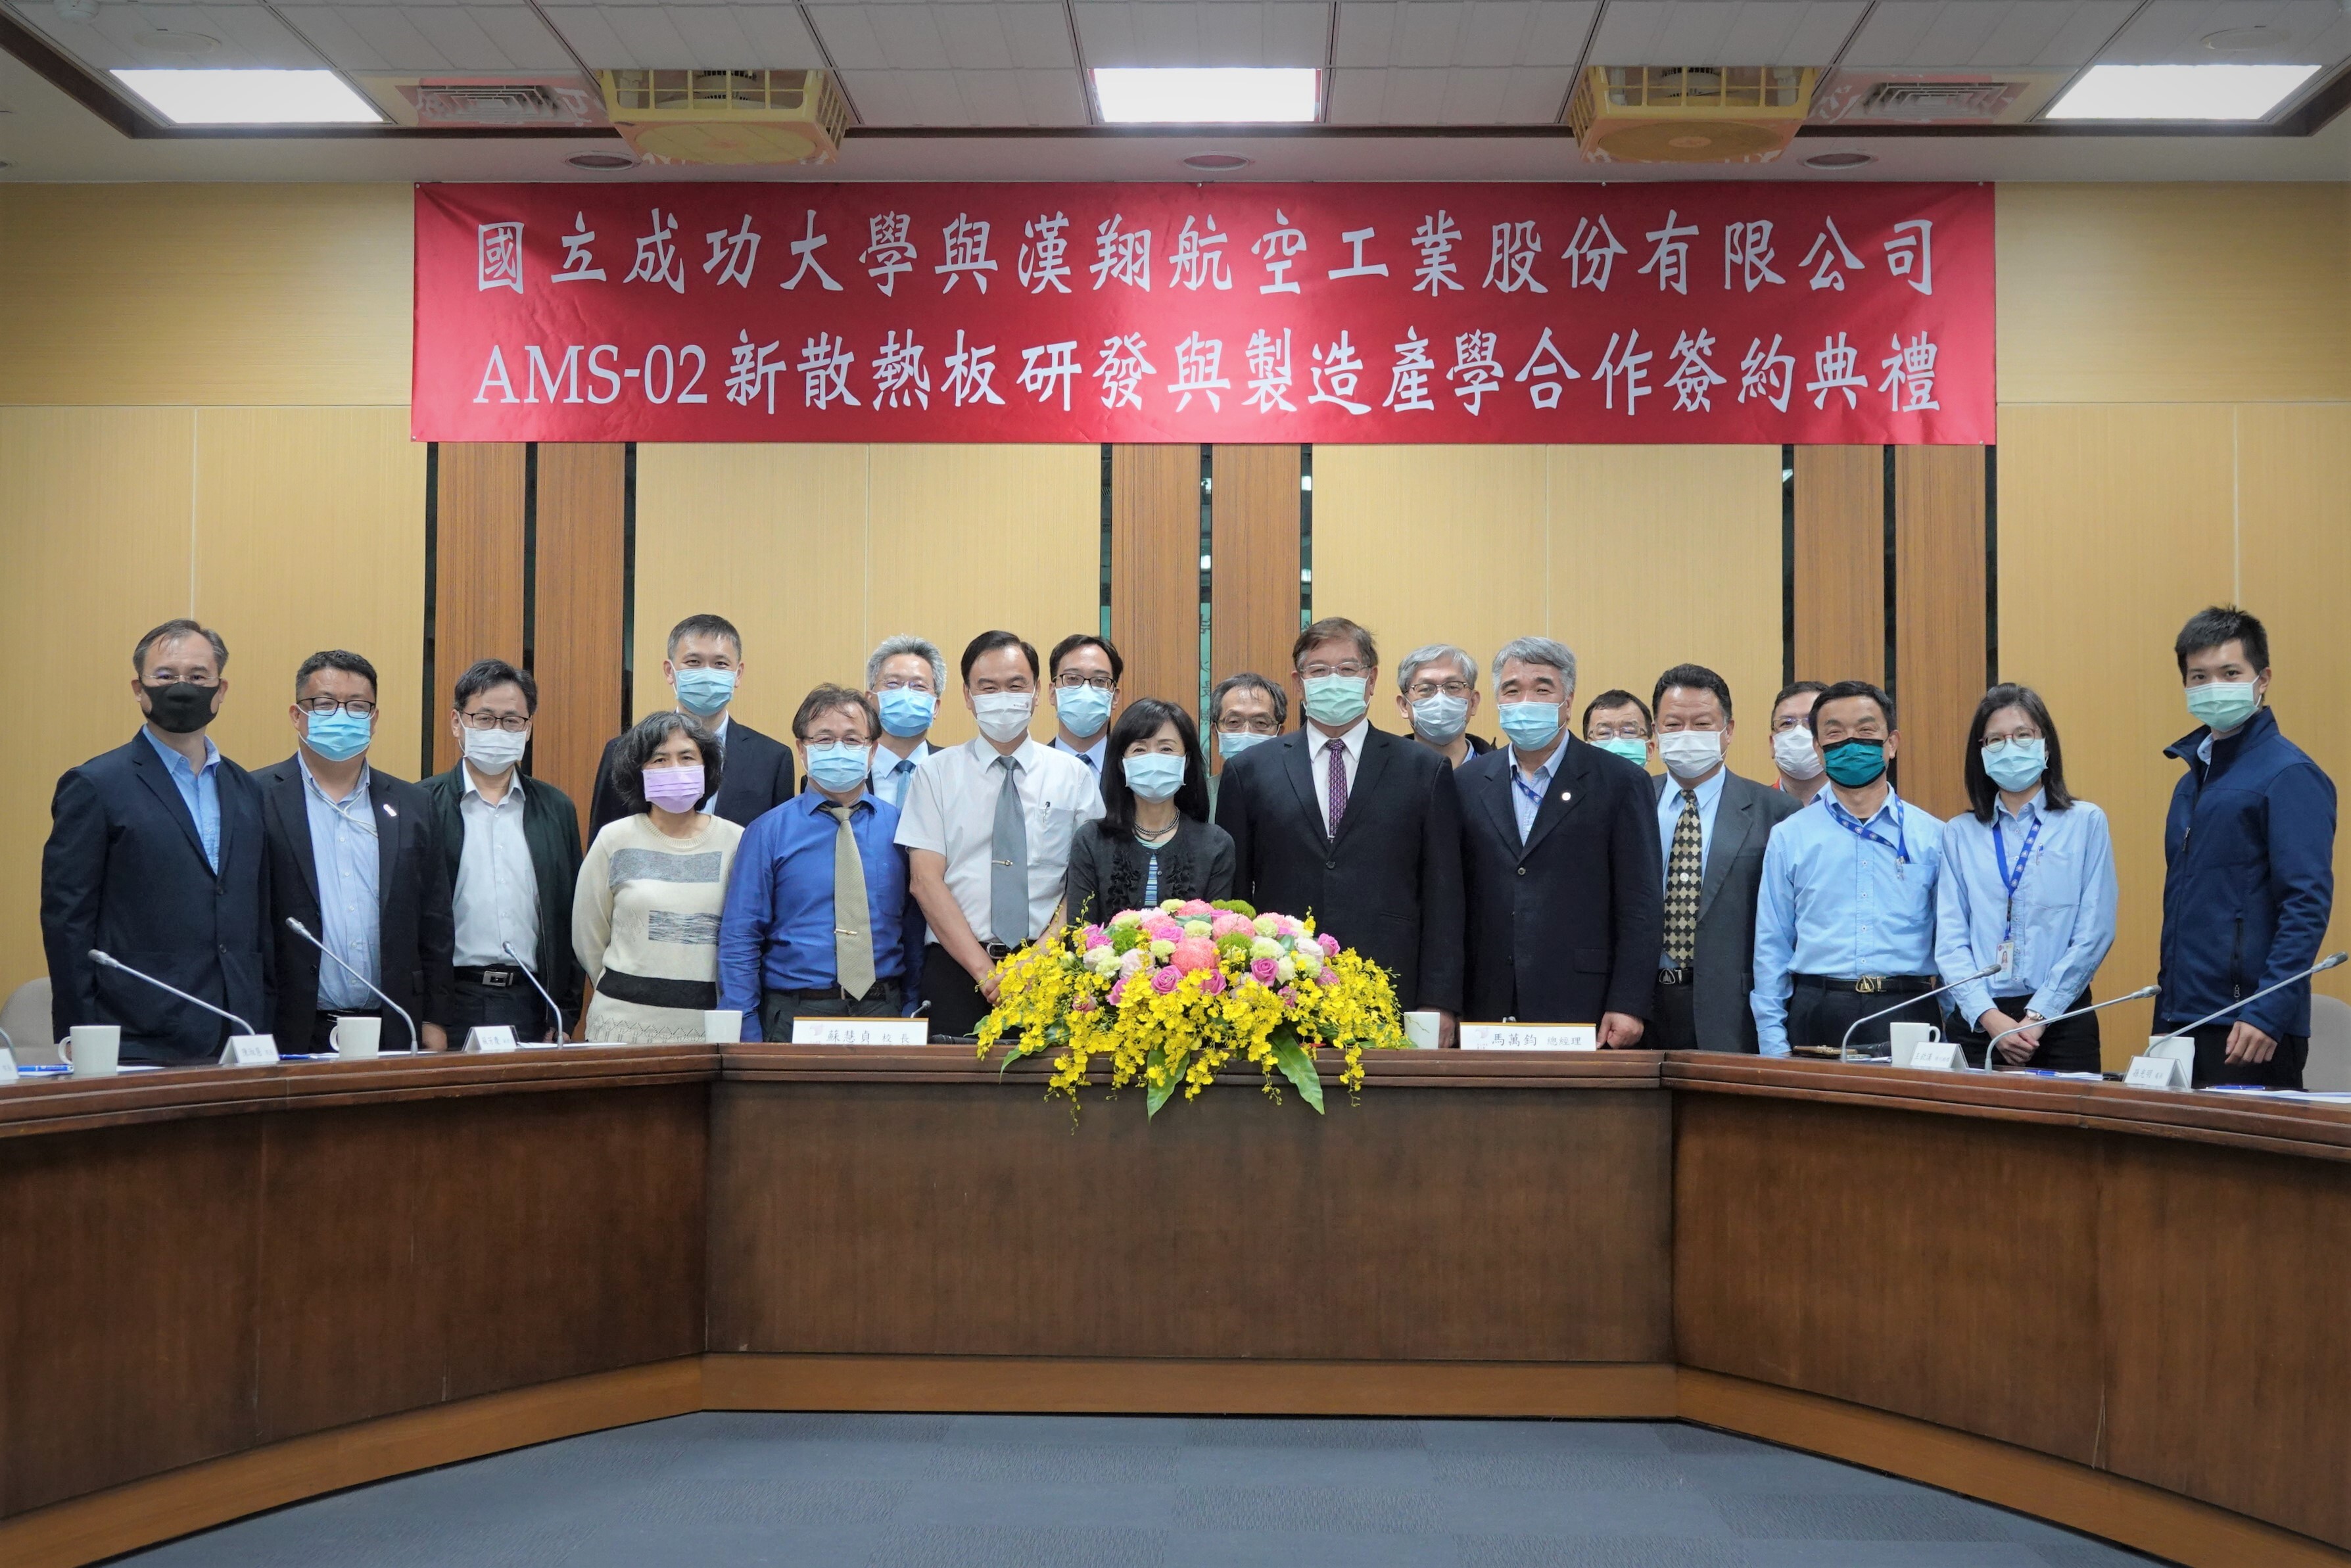  NCKU and AIDC, the two strongholds of aeronautics, cooperate again since 2019.